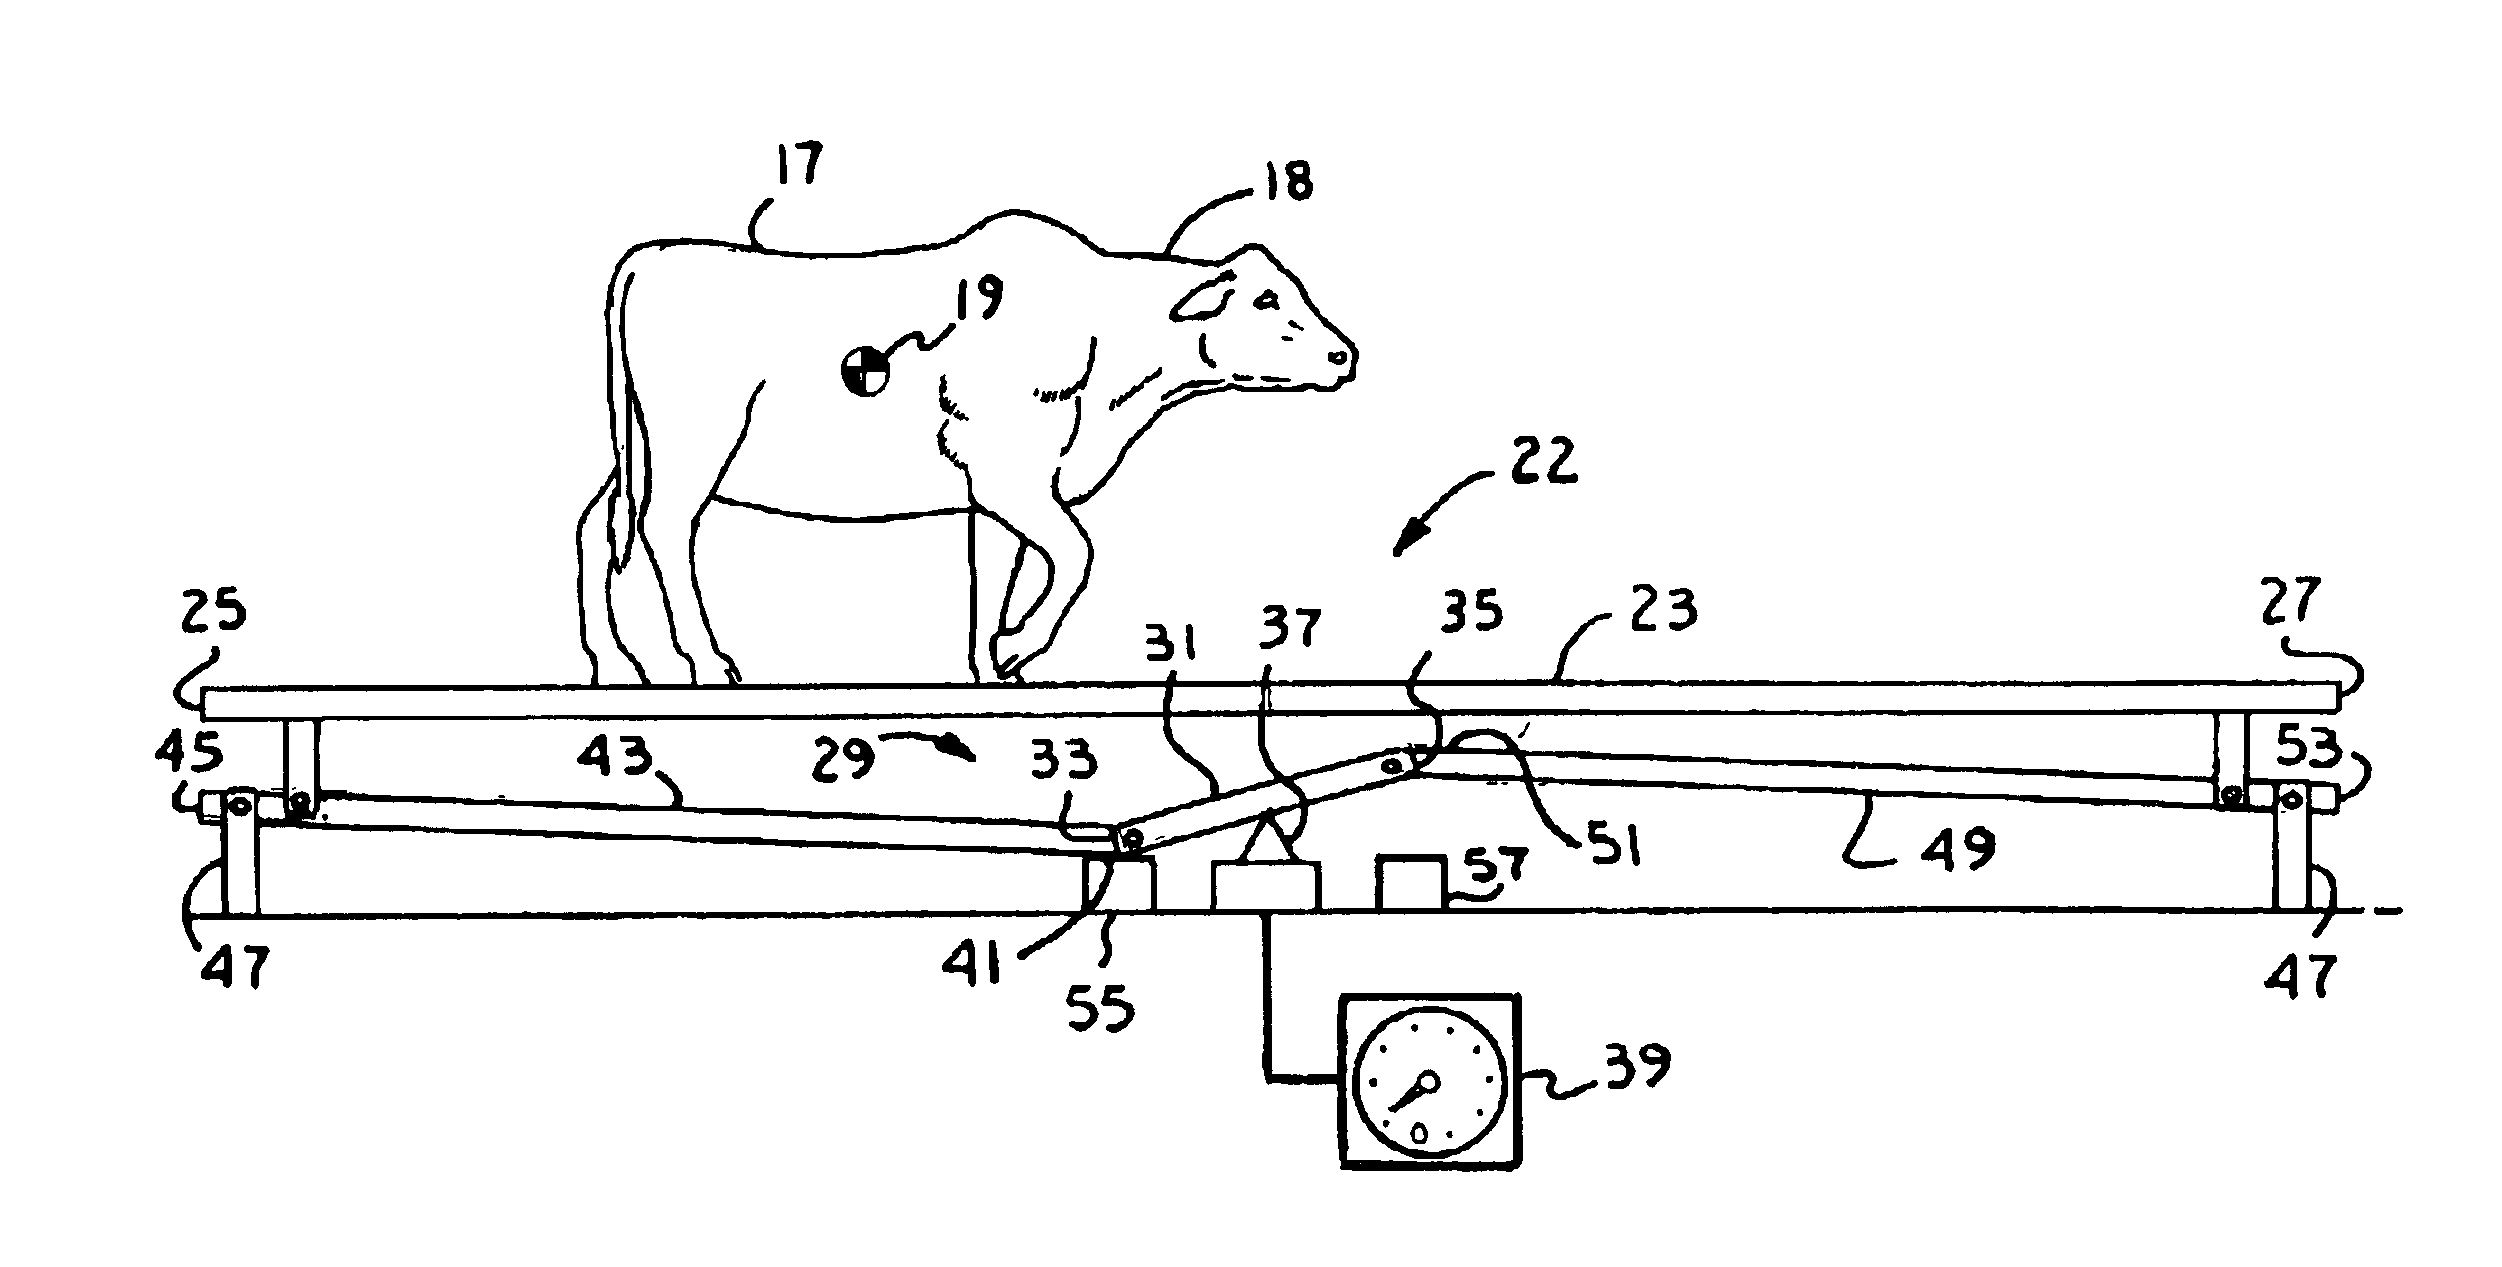 Tipping balance scale for weighing moving objects